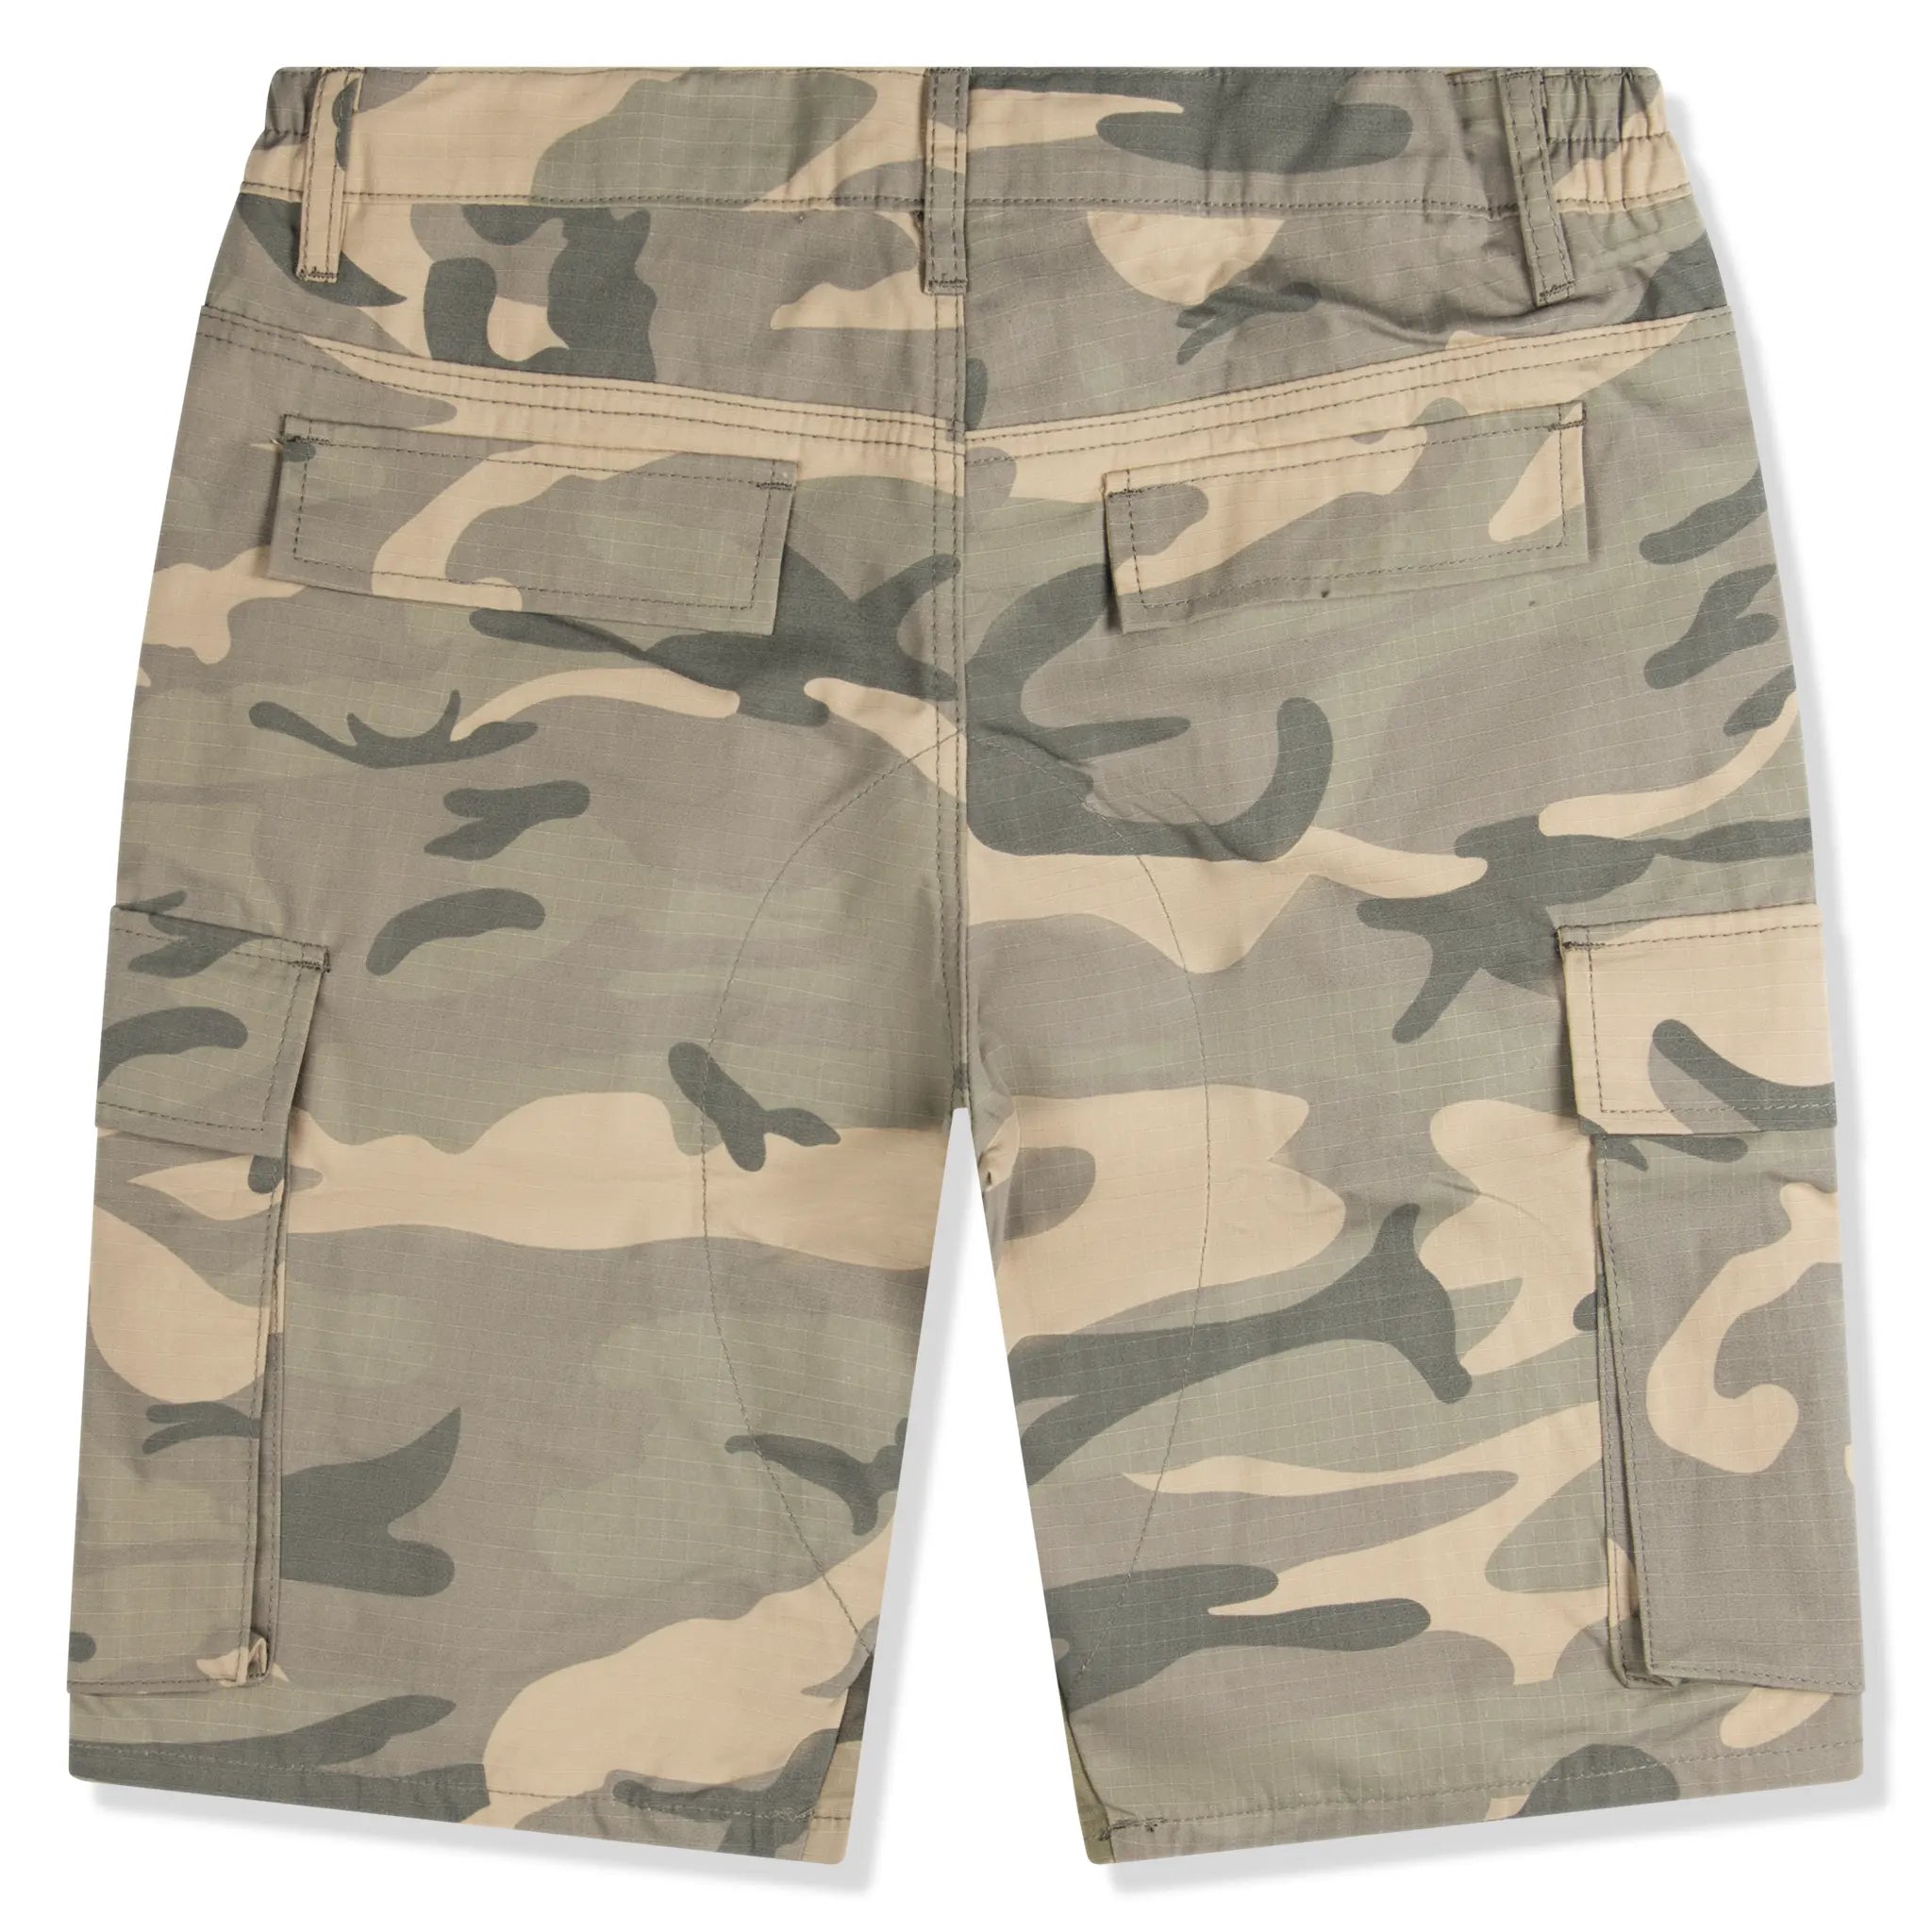 Back view of SIARR Camo Shorts Green